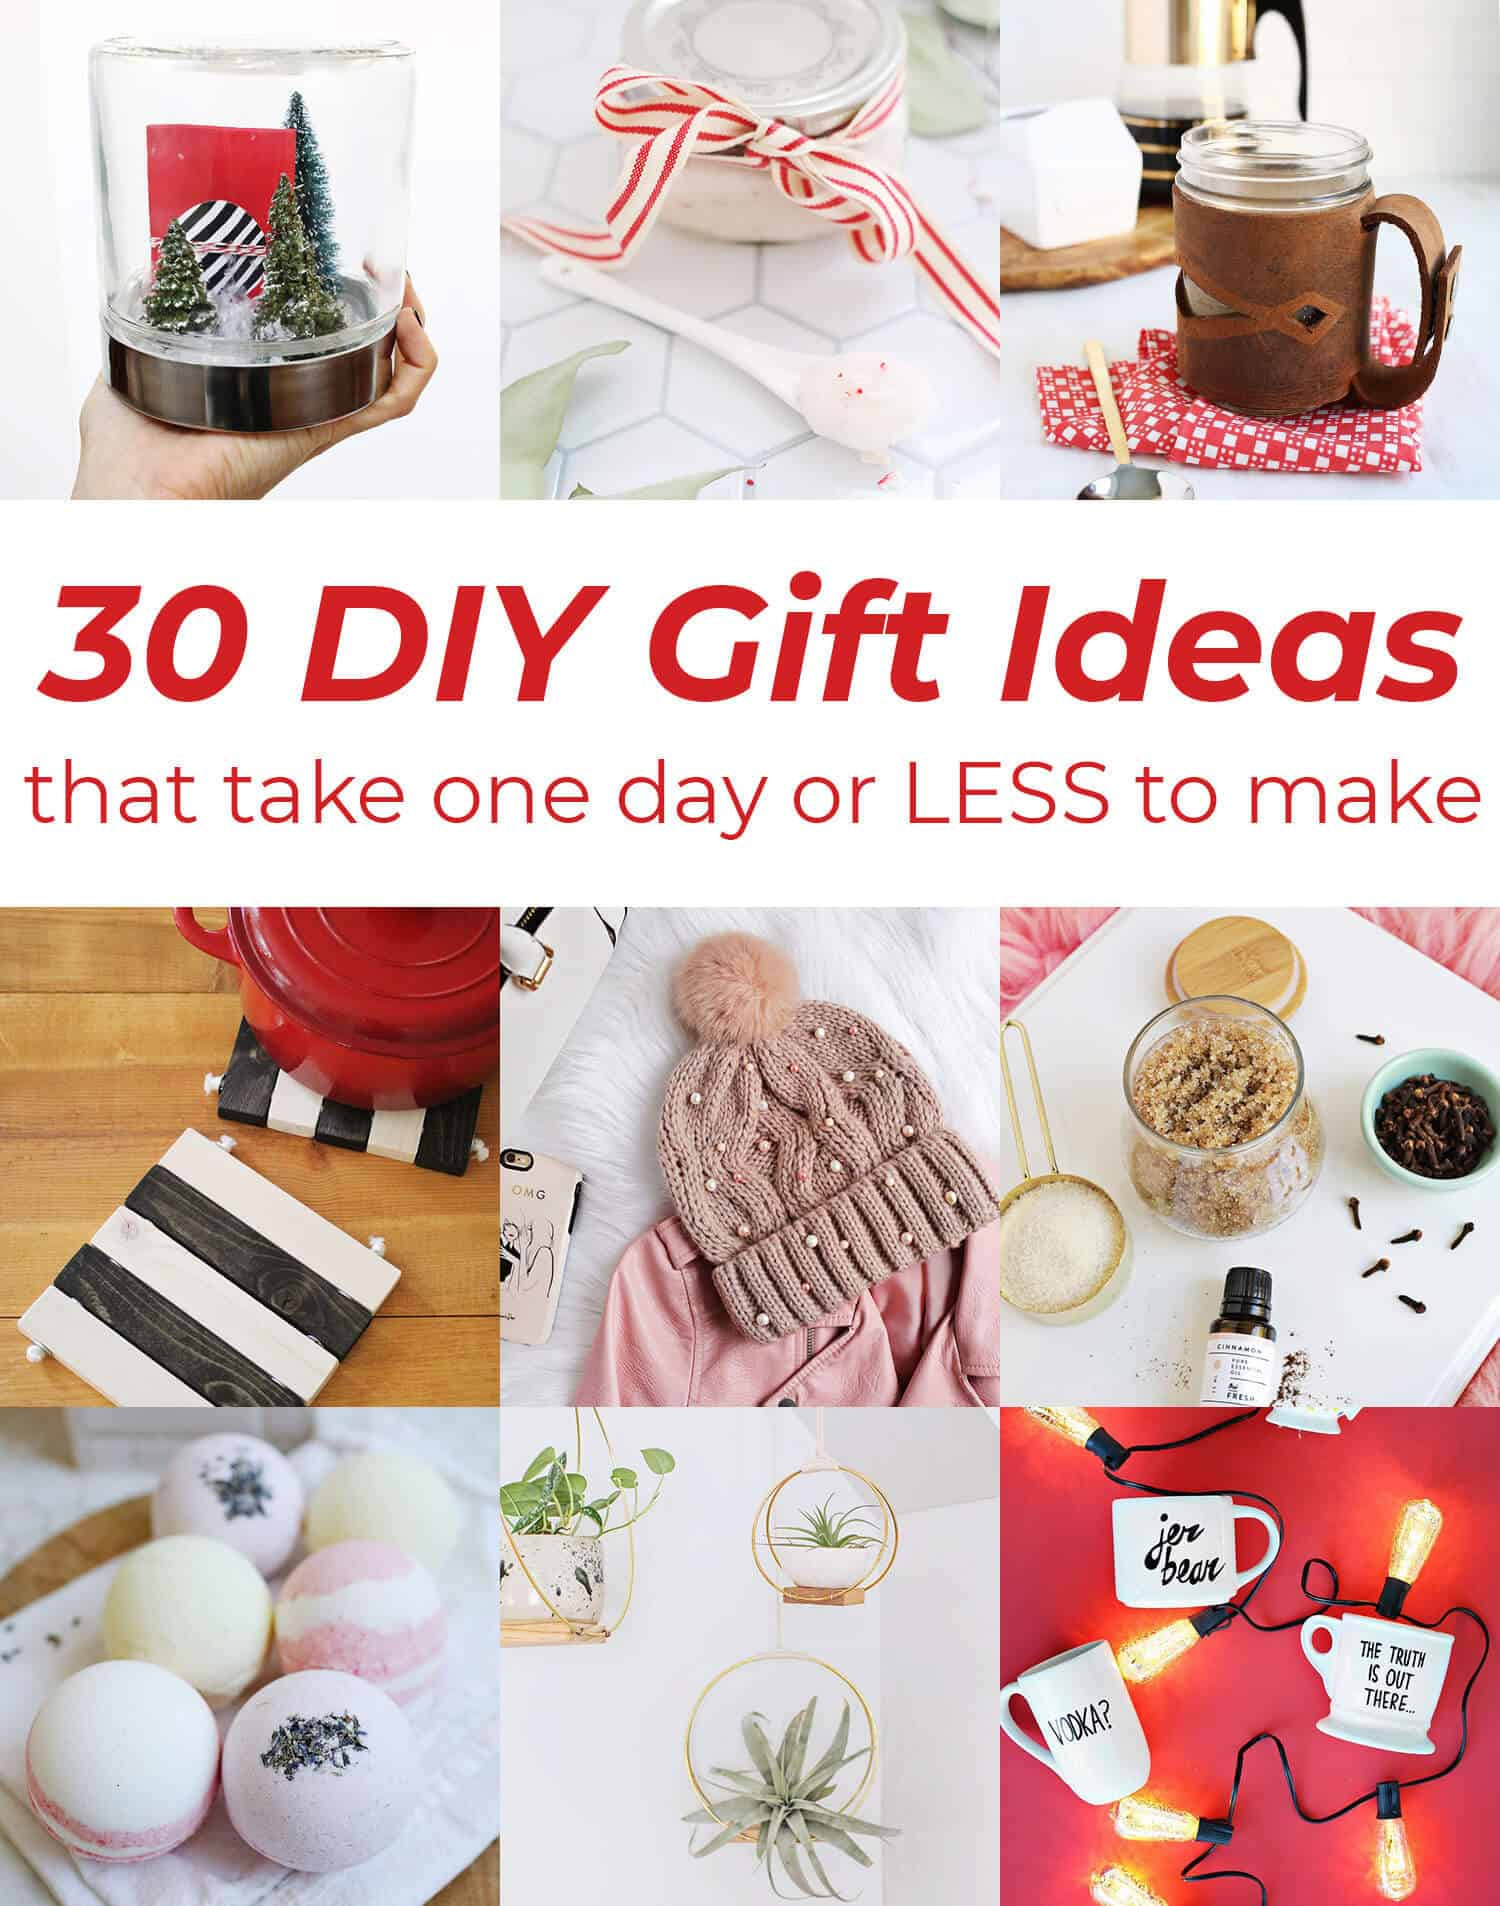 DIY Gift Idea
 You Can Make Happy Your Loved es With These Wonderful